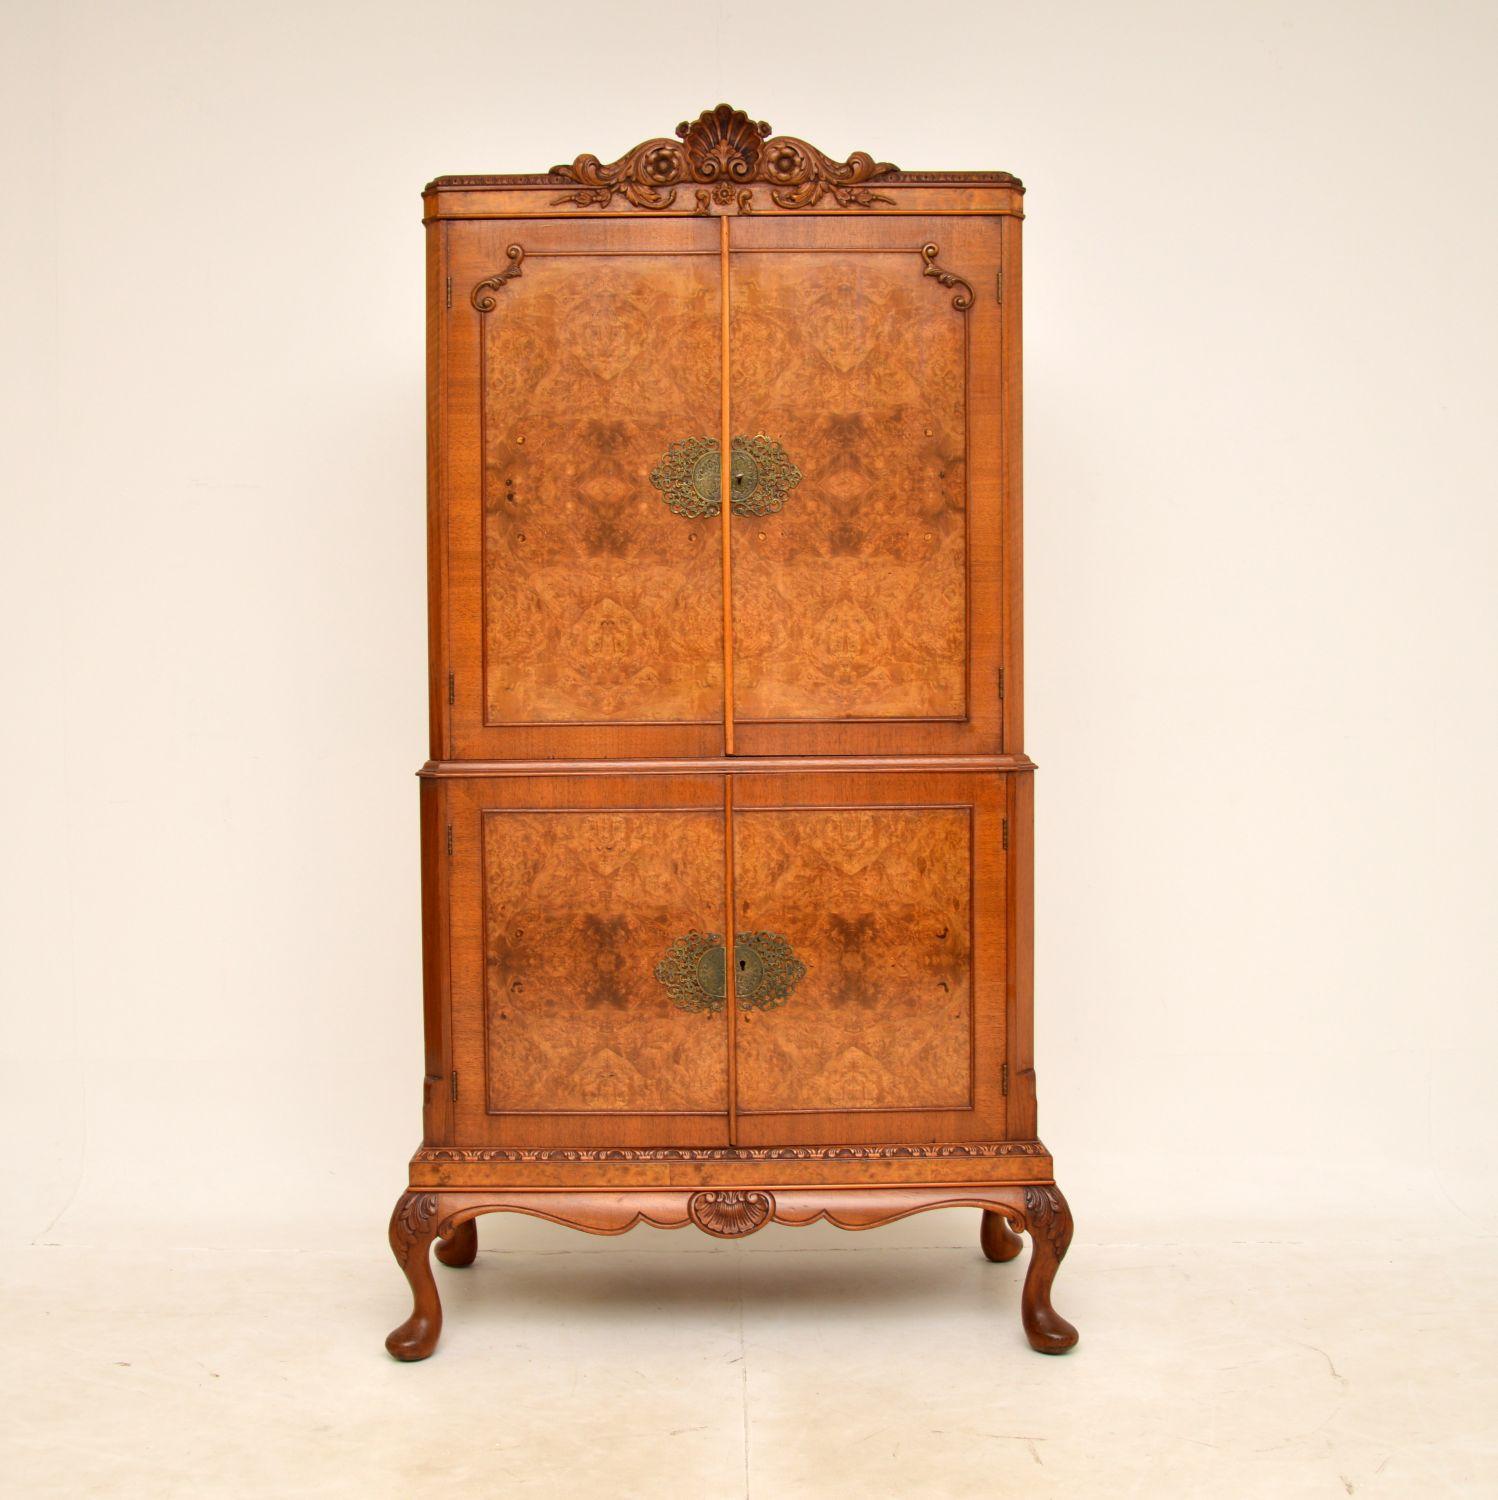 A stunning antique burr walnut cocktail drinks cabinet in the Queen Anne style. This was made in England, it dates from around the 1920-30’s.

It is of superb quality, with spectacular walnut grain patterns and fine, crisp carving throughout. The